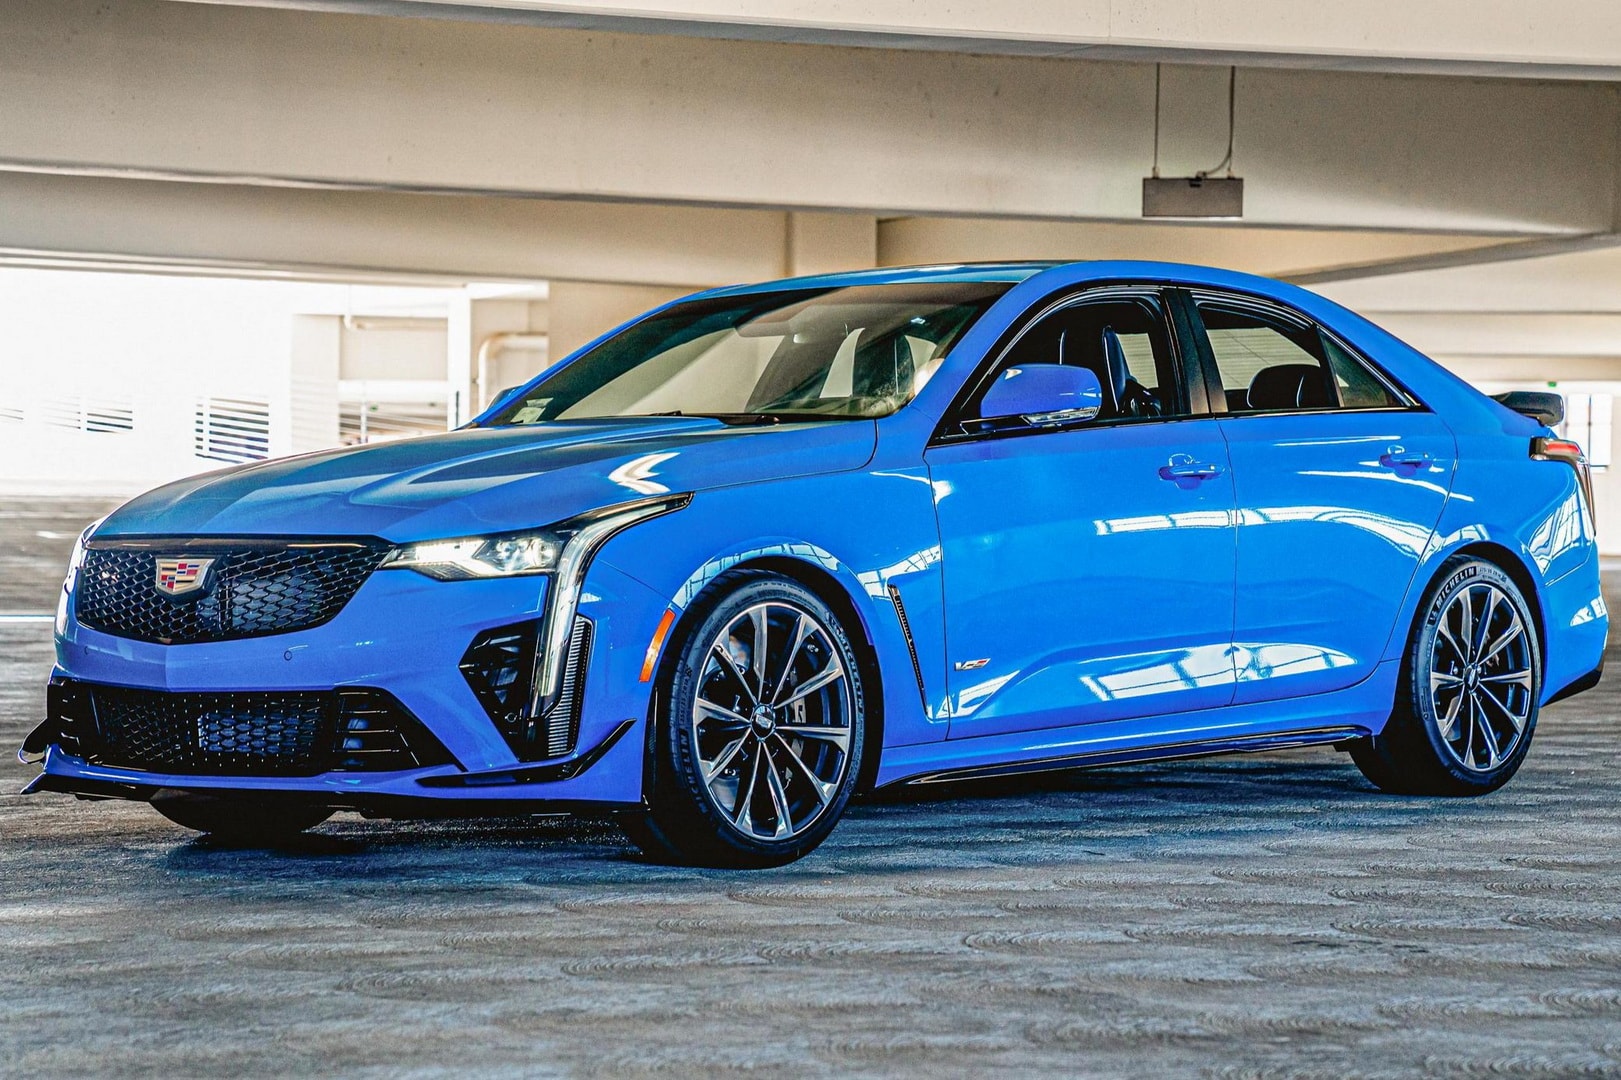 2022 Cadillac CT4V Gets New Electric Blue Color First Look vlr.eng.br